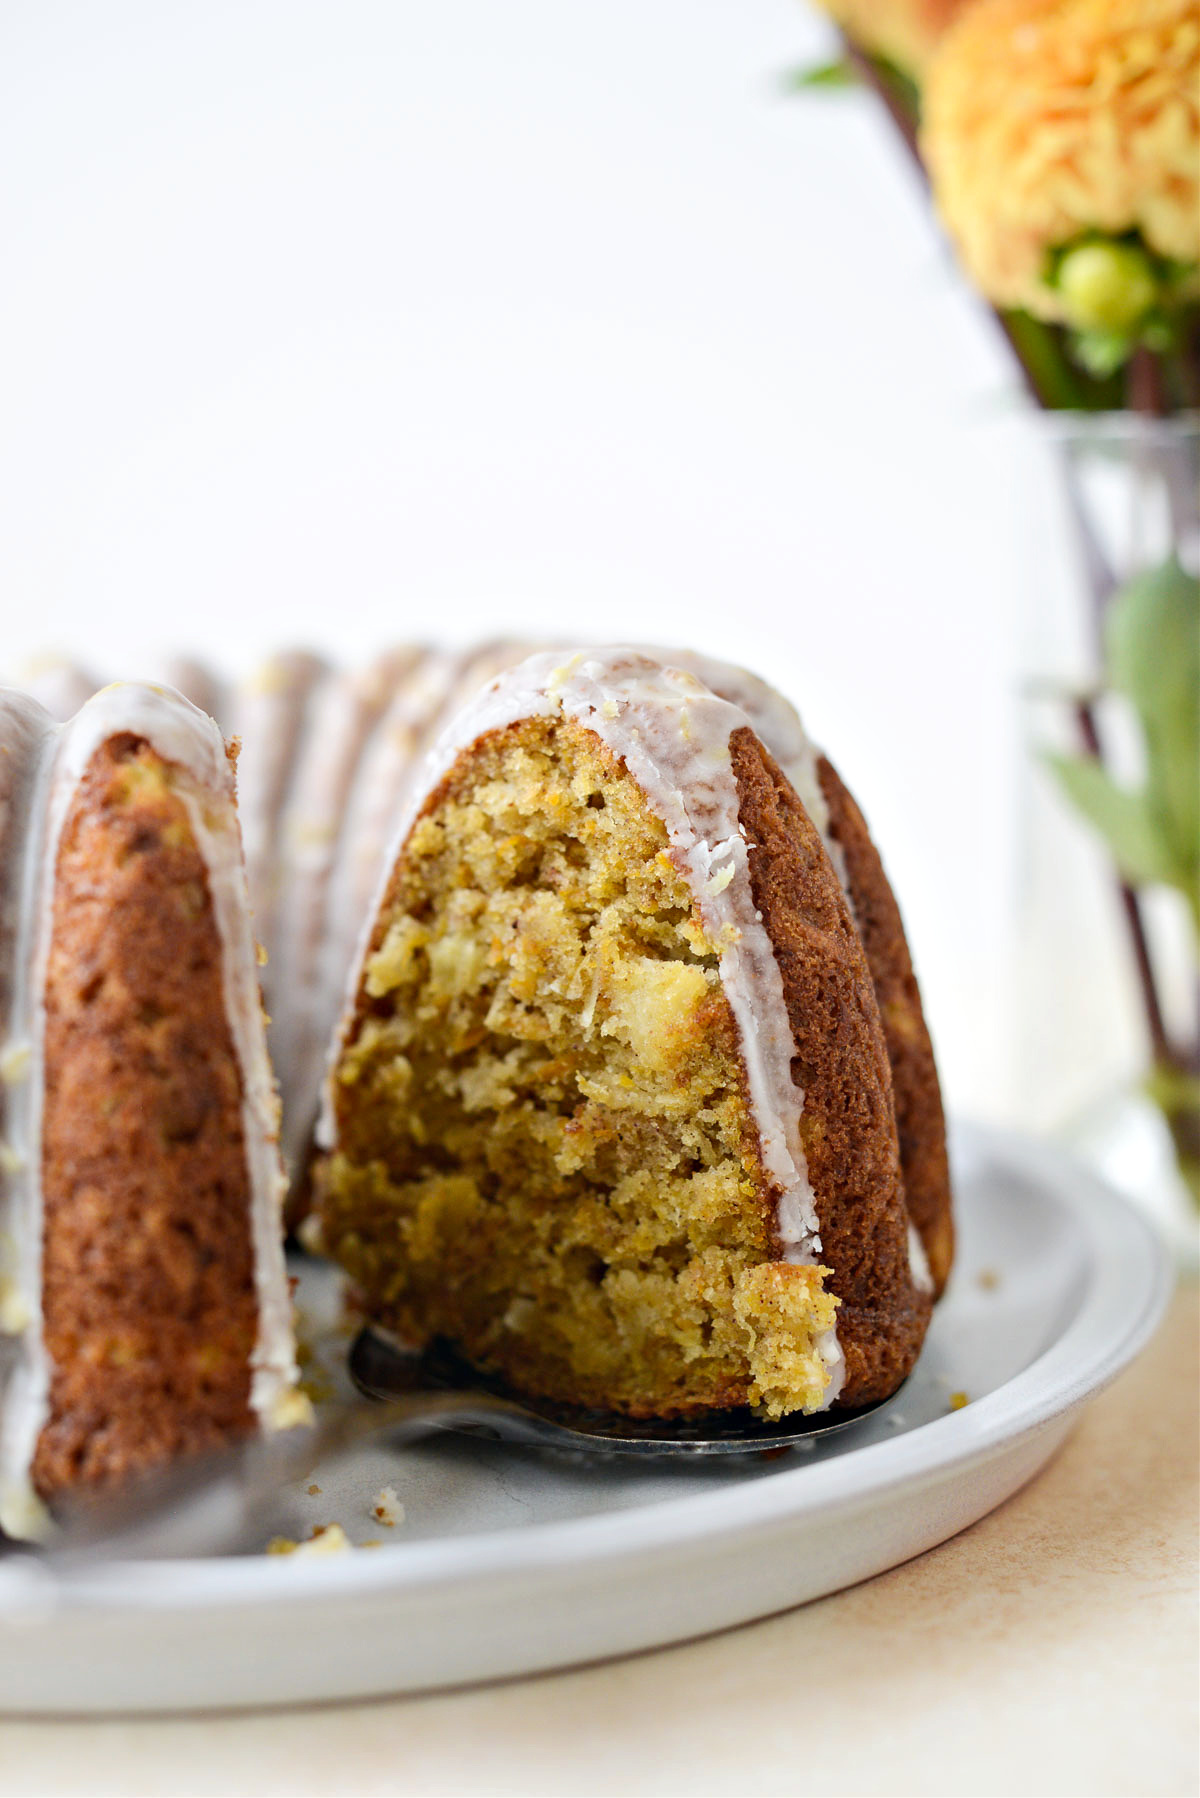 Old Fashioned Carrot Cake Recipe with Pineapple - Two Kooks In The Kitchen